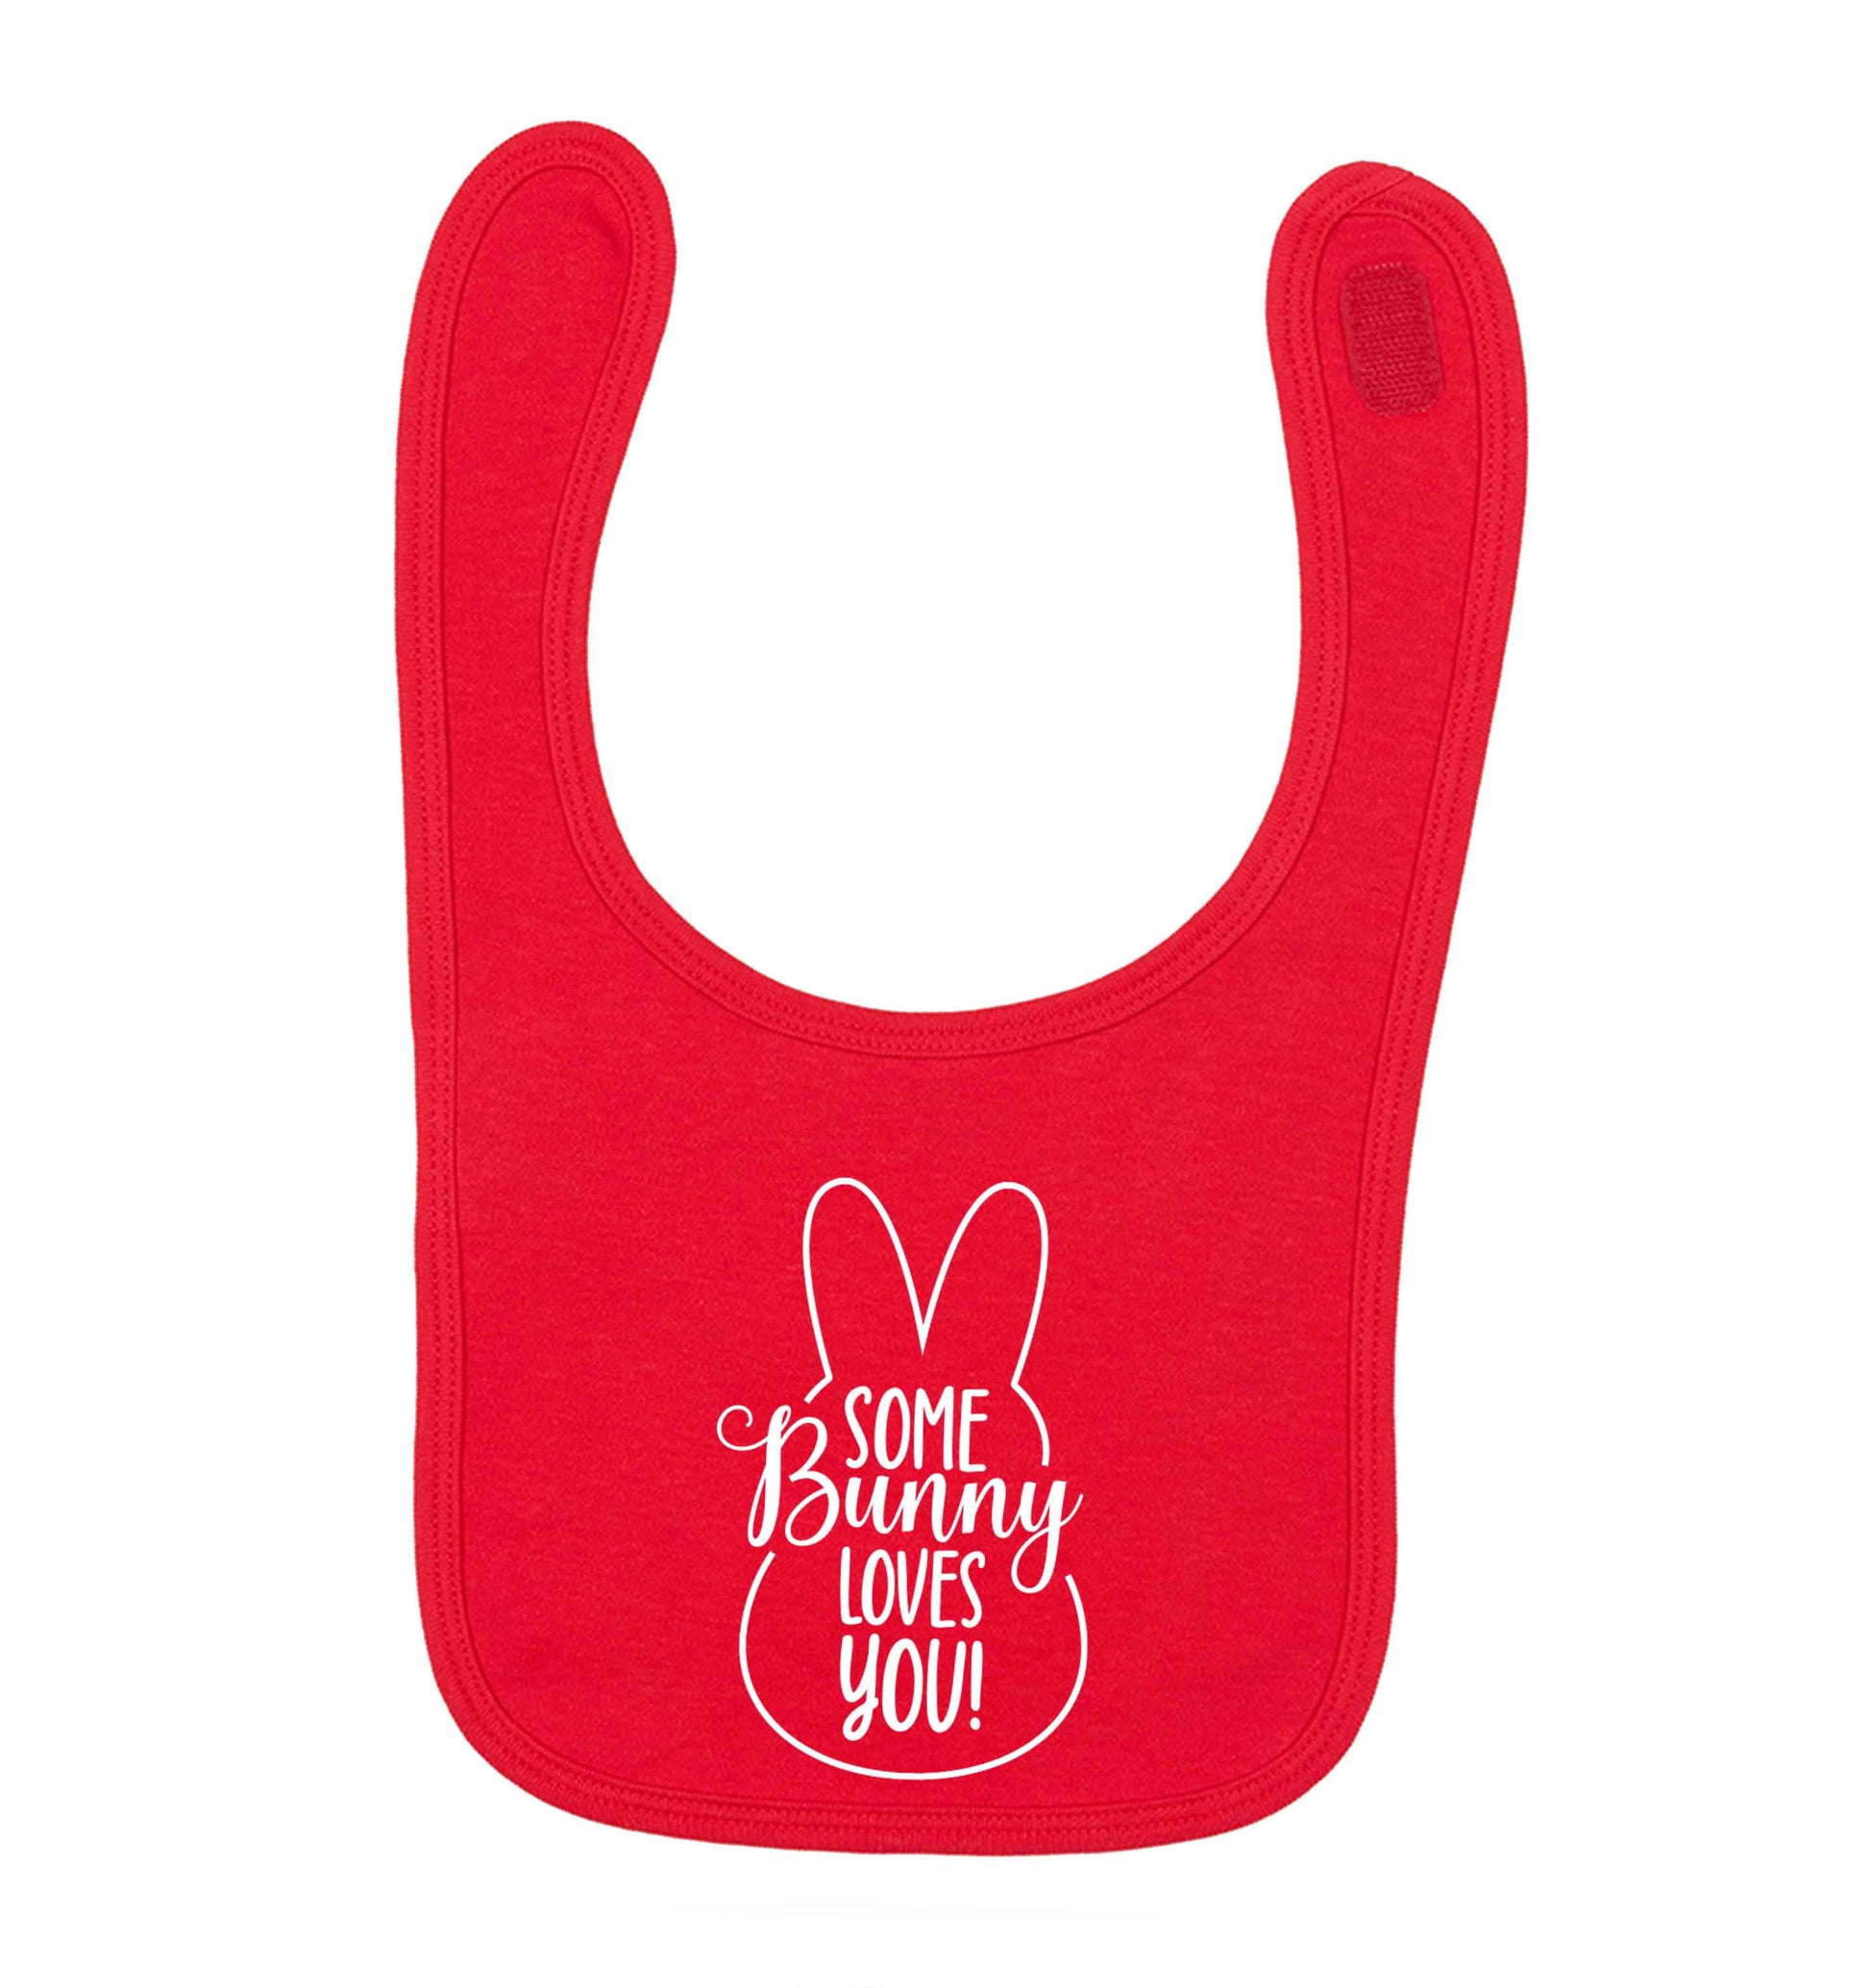 Some bunny loves you red baby bib